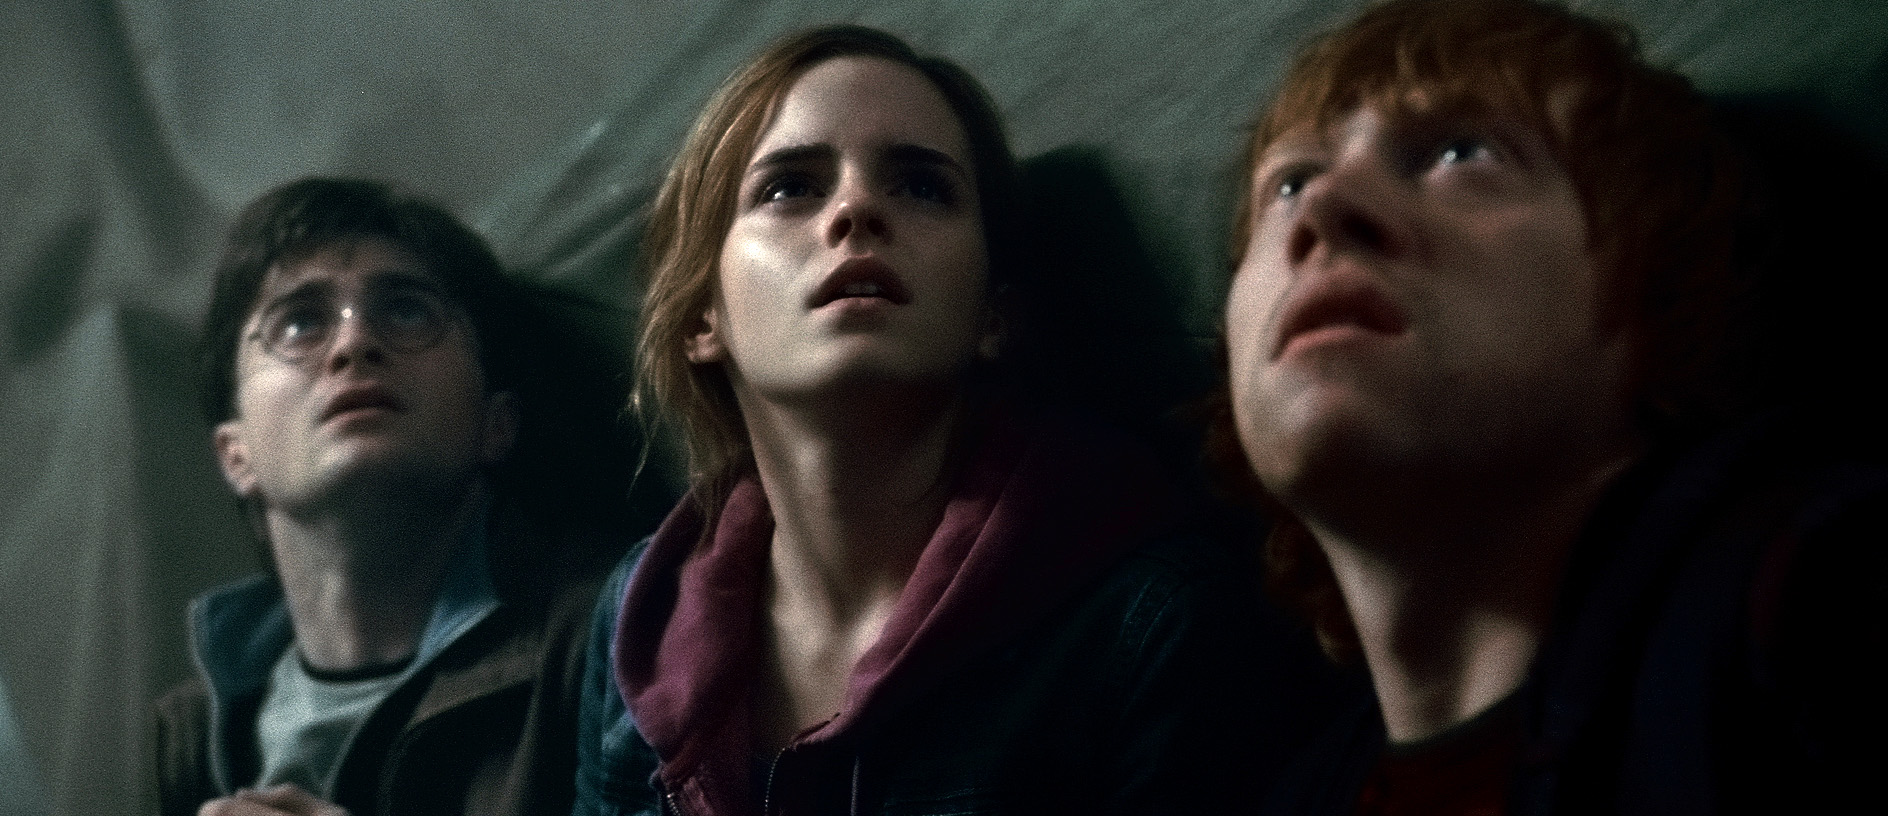 Harry Potter And The Deathly Hallows Part 2 Dvdscr P2p4u